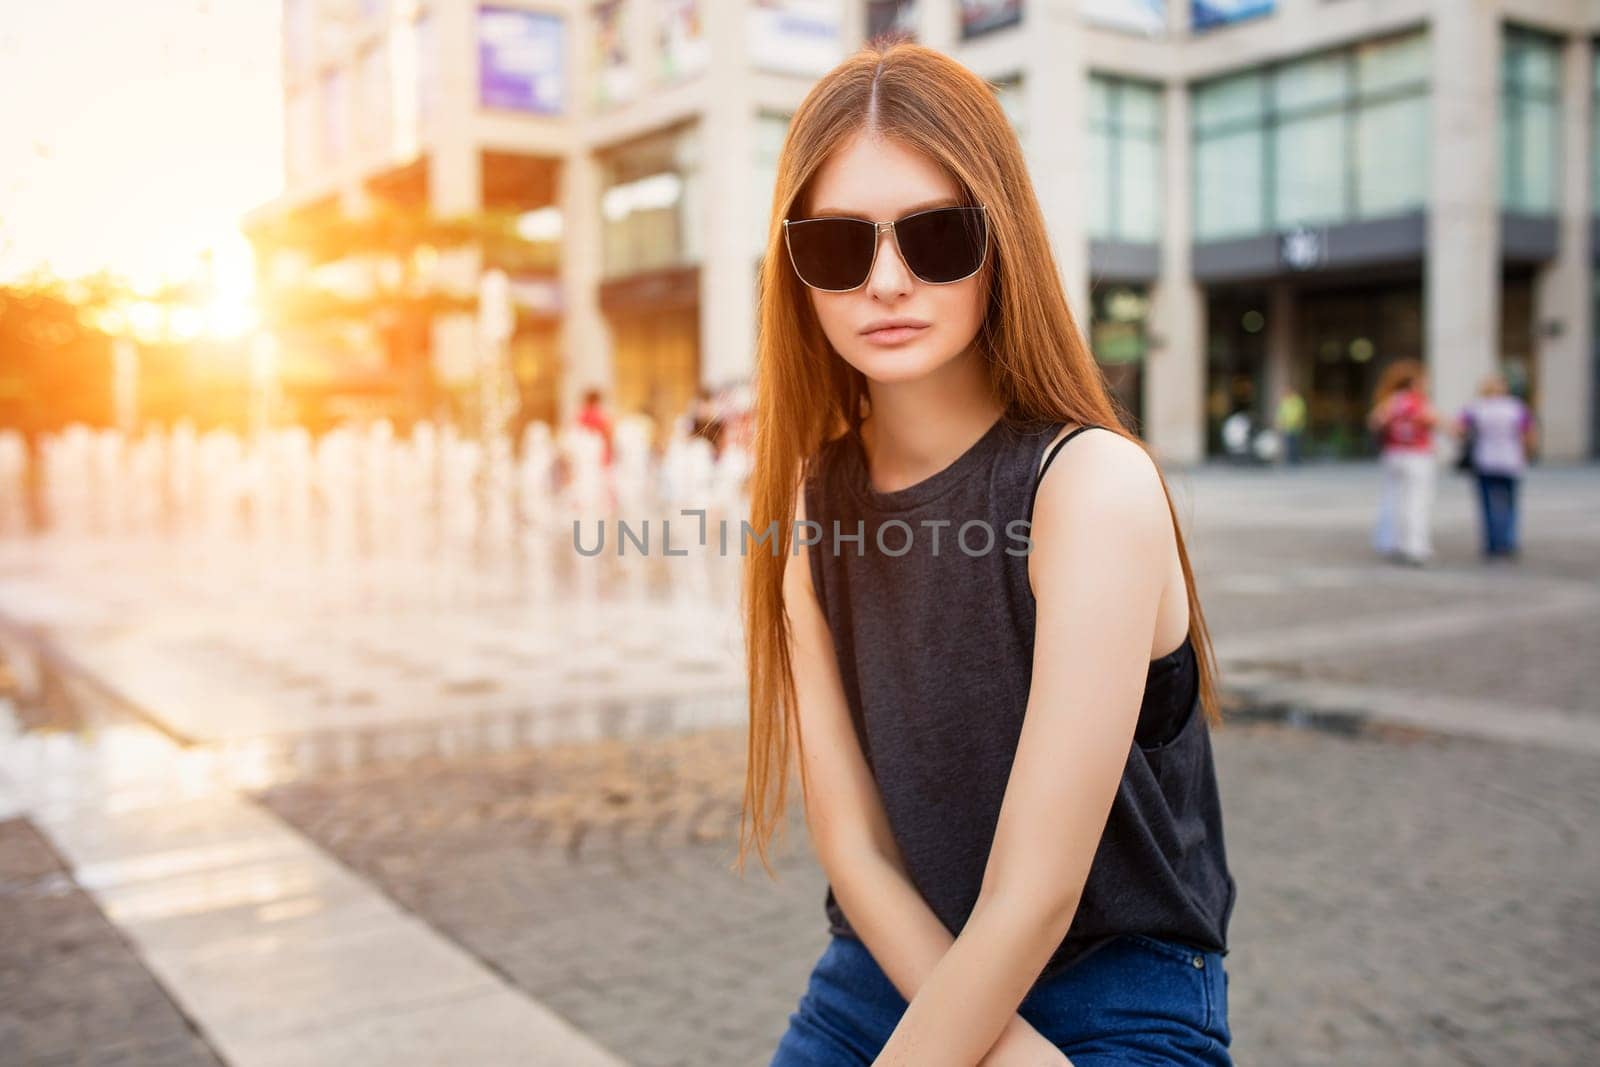 Fashion portrait of beautiful young woman in sunglasses, with view modern city under the warm rays of sun